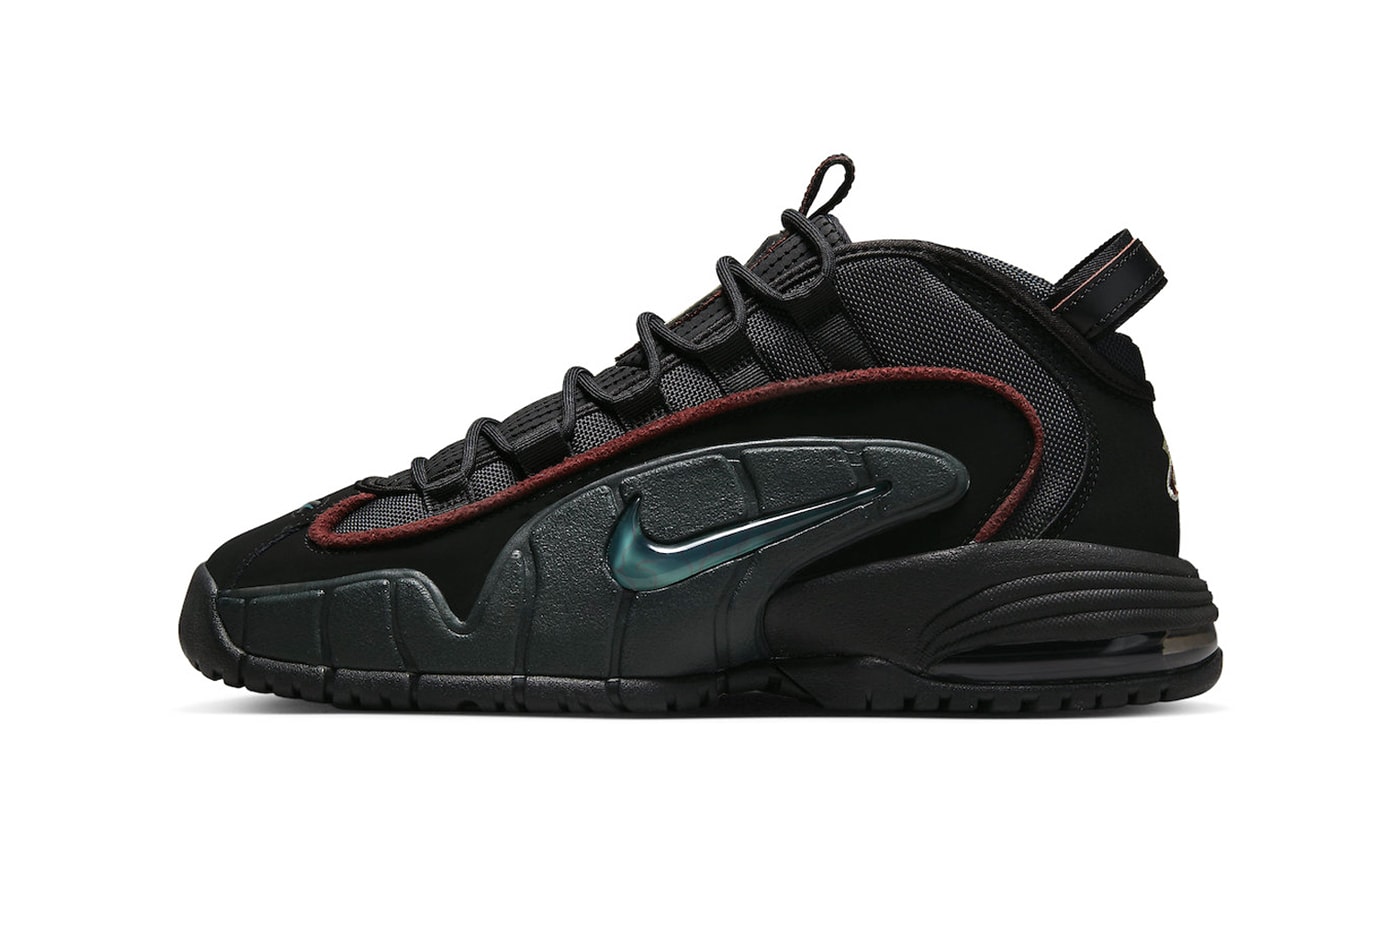 Nike Air Max Penny 1 Faded Spruce Official Look Release Info DV7442-001 Date Buy Price Black Anthracite Dark Pony Penny Hardaway